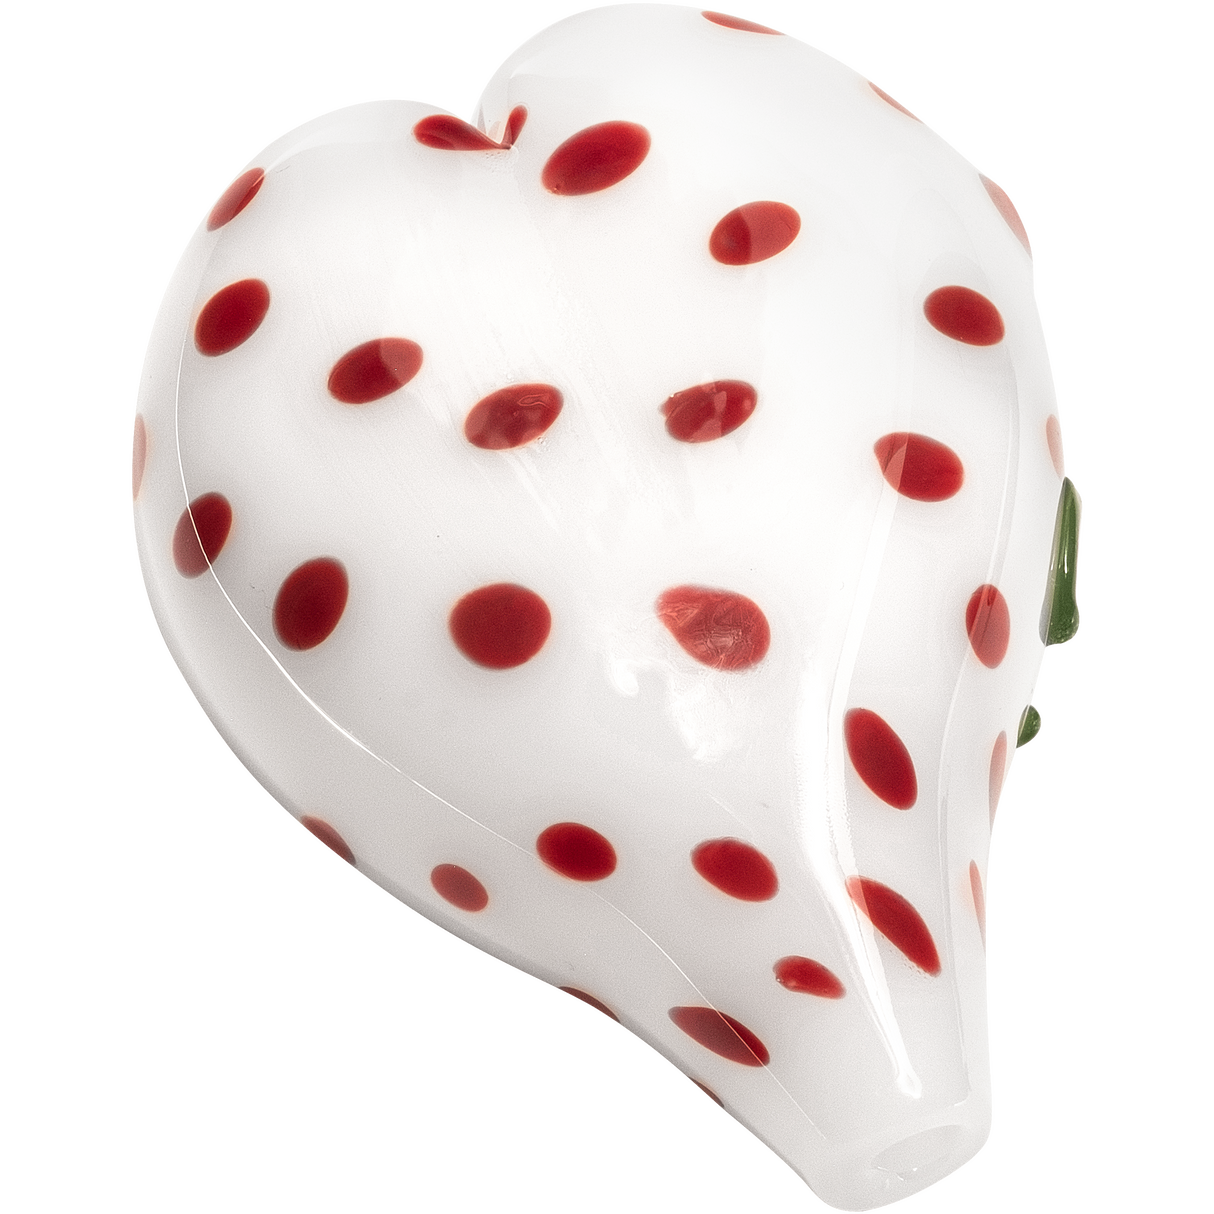 LA Pipes White Heart-Shaped Hand Pipe with Red Dots, Borosilicate Glass, Portable Design